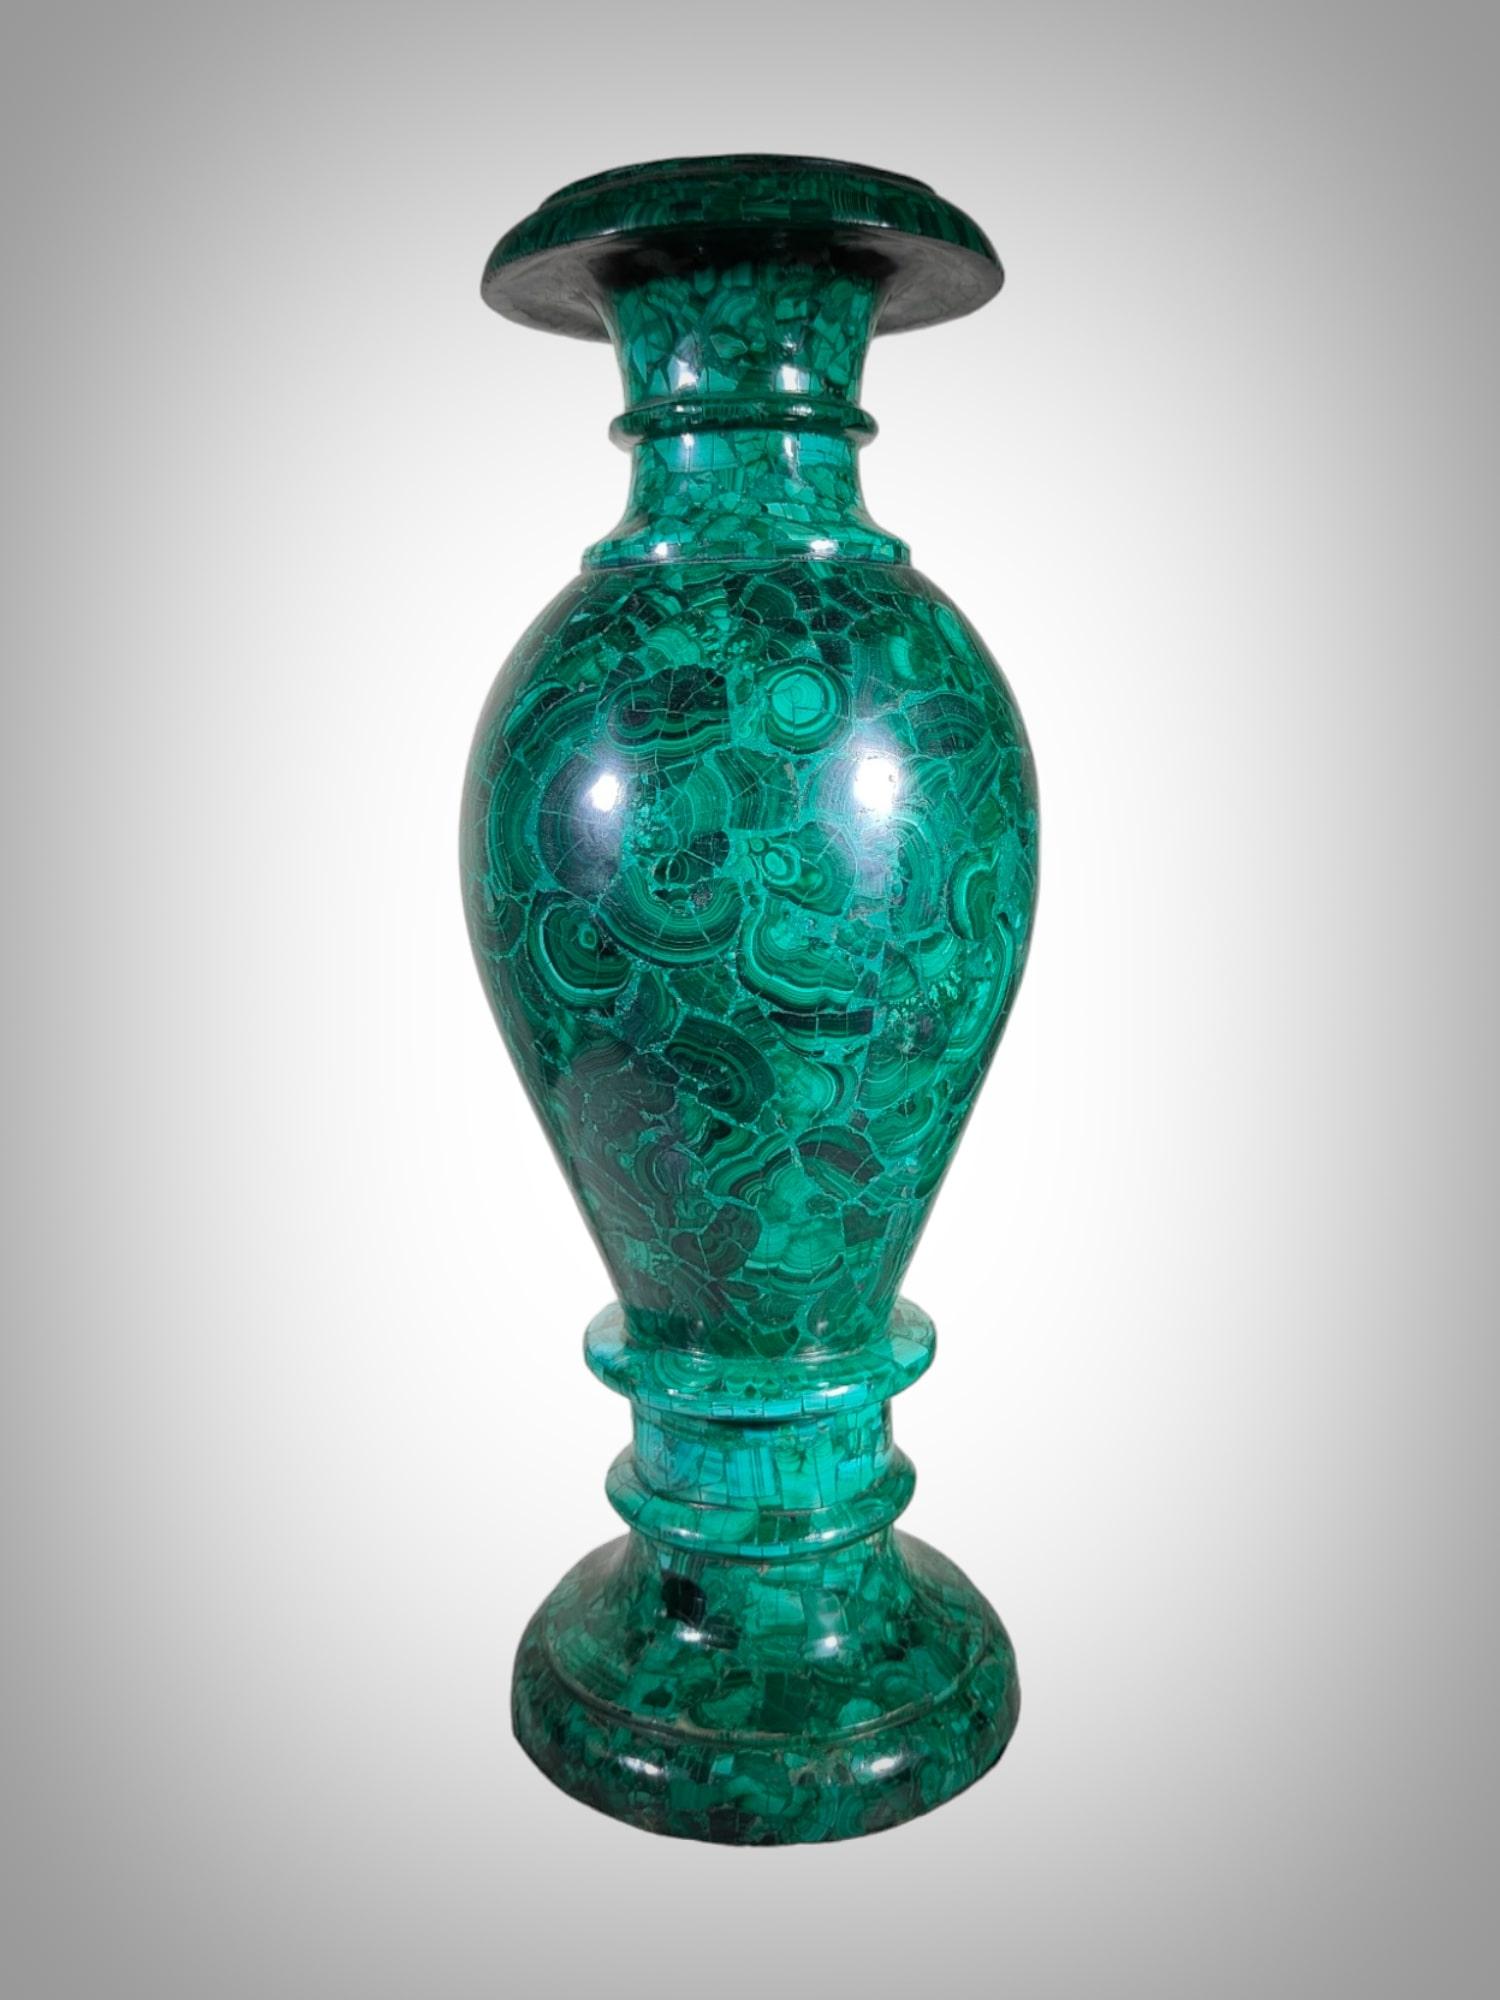 This impressive Italian malachite jar from the 80s is a verdadera made by a master of craftsmanship and design. Exhibiting a rich and exuberant tone of malachite green, this piece is a testimony to artistic skill and the attention to detail that